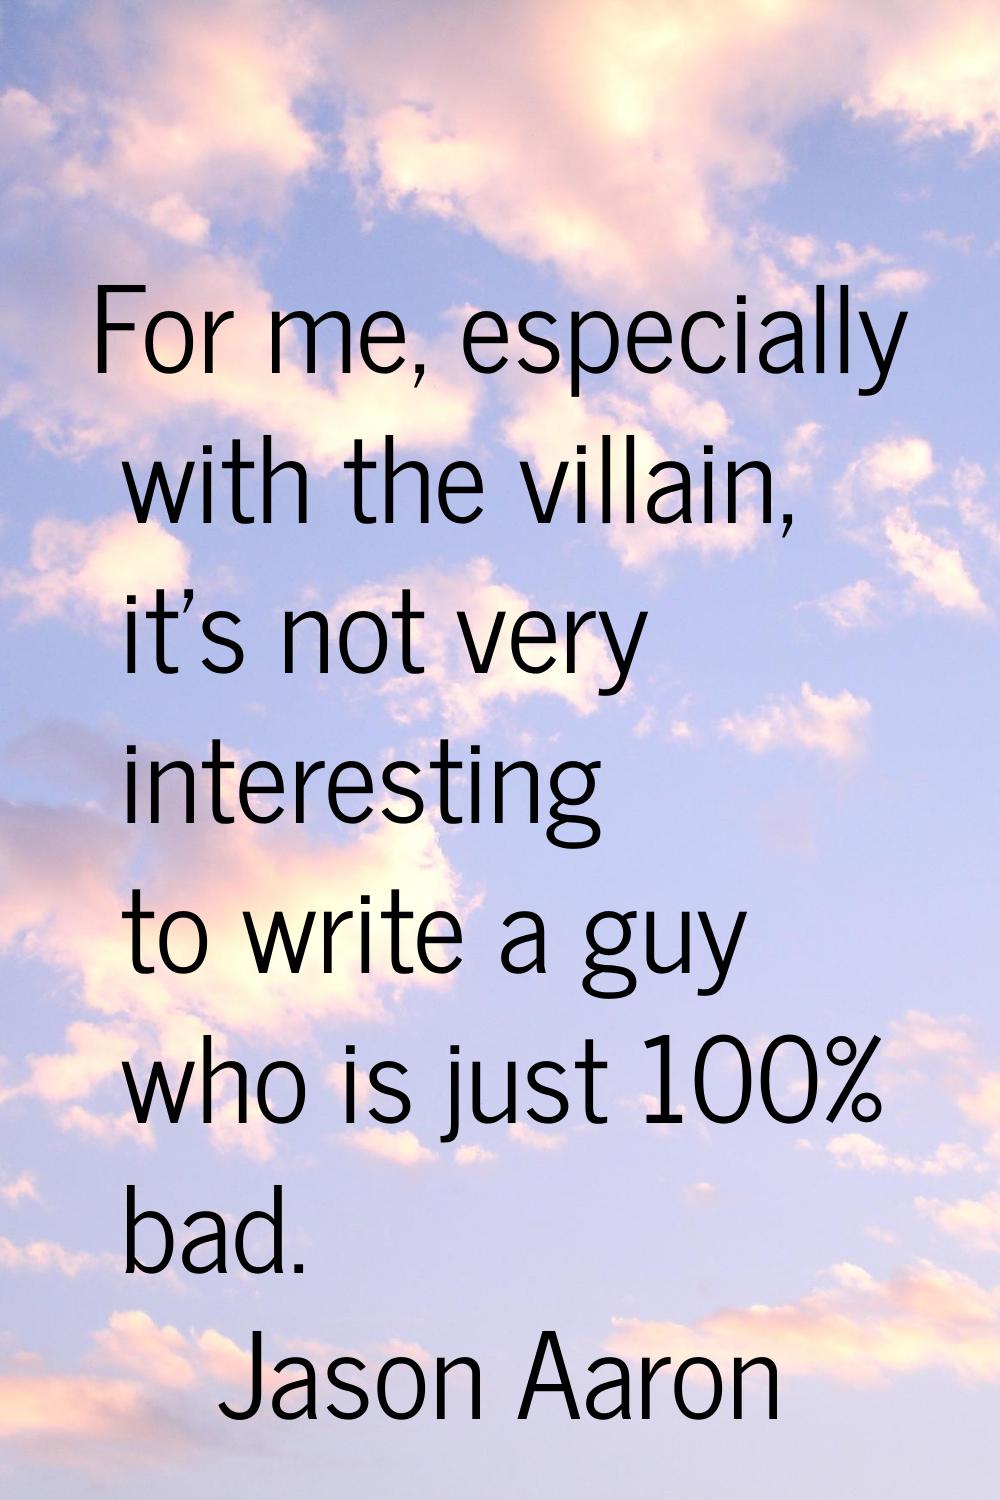 For me, especially with the villain, it's not very interesting to write a guy who is just 100% bad.